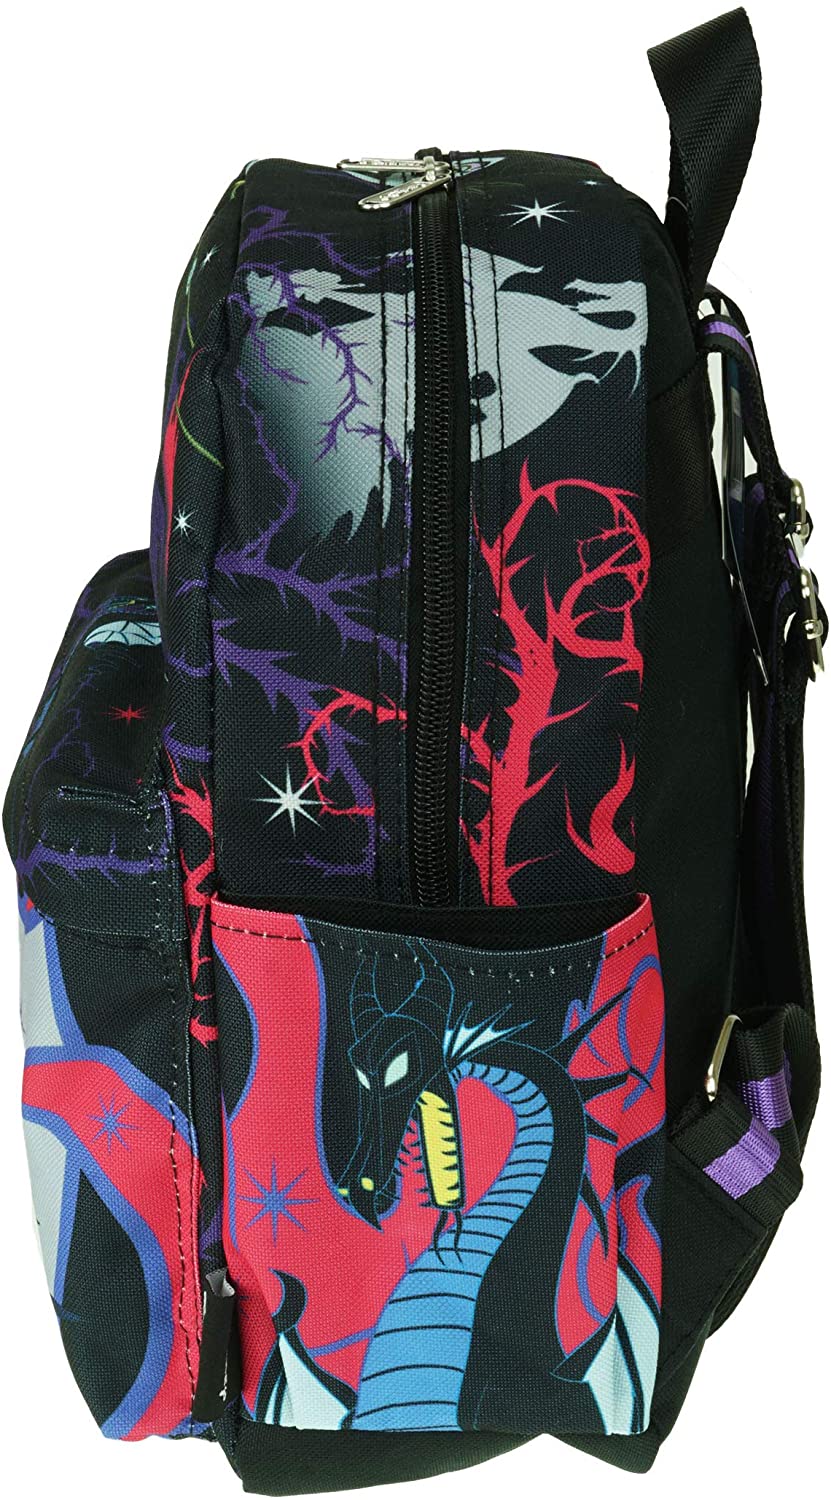 Maleficent 12" Deluxe Oversize Print Daypack - A21311 - GTE Zone